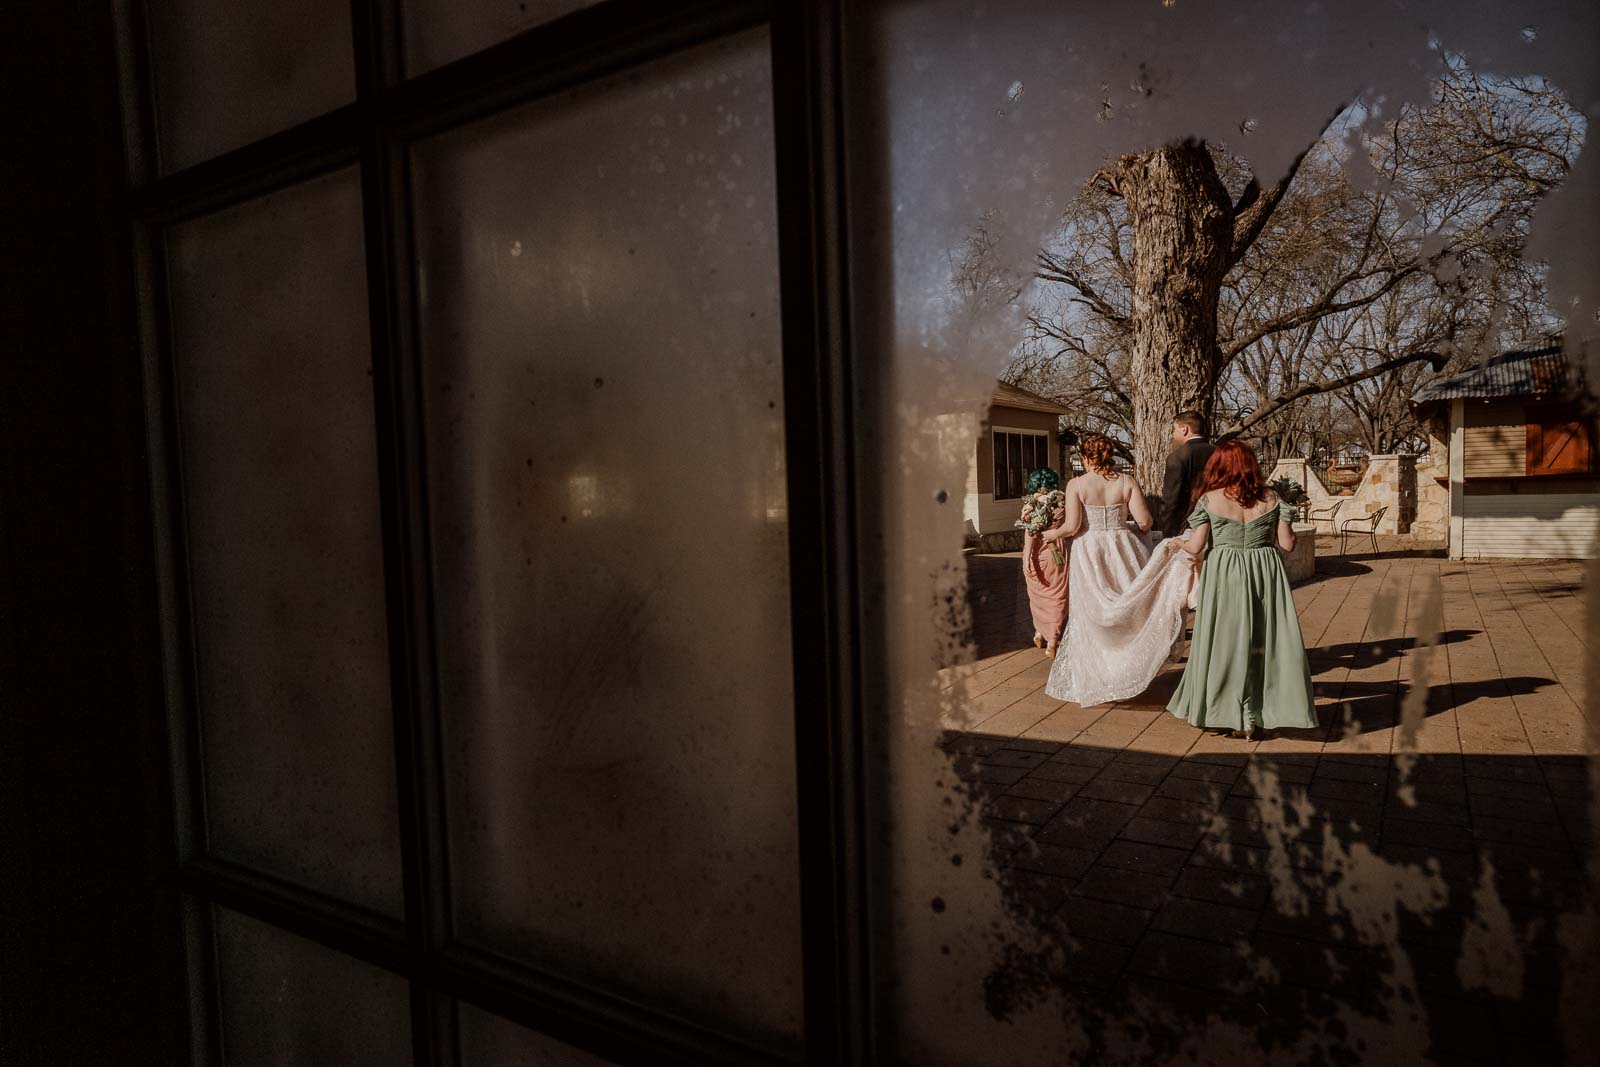 The bride and sister of the bride holds her dress as she walks towards the church photographs through the layering of a window